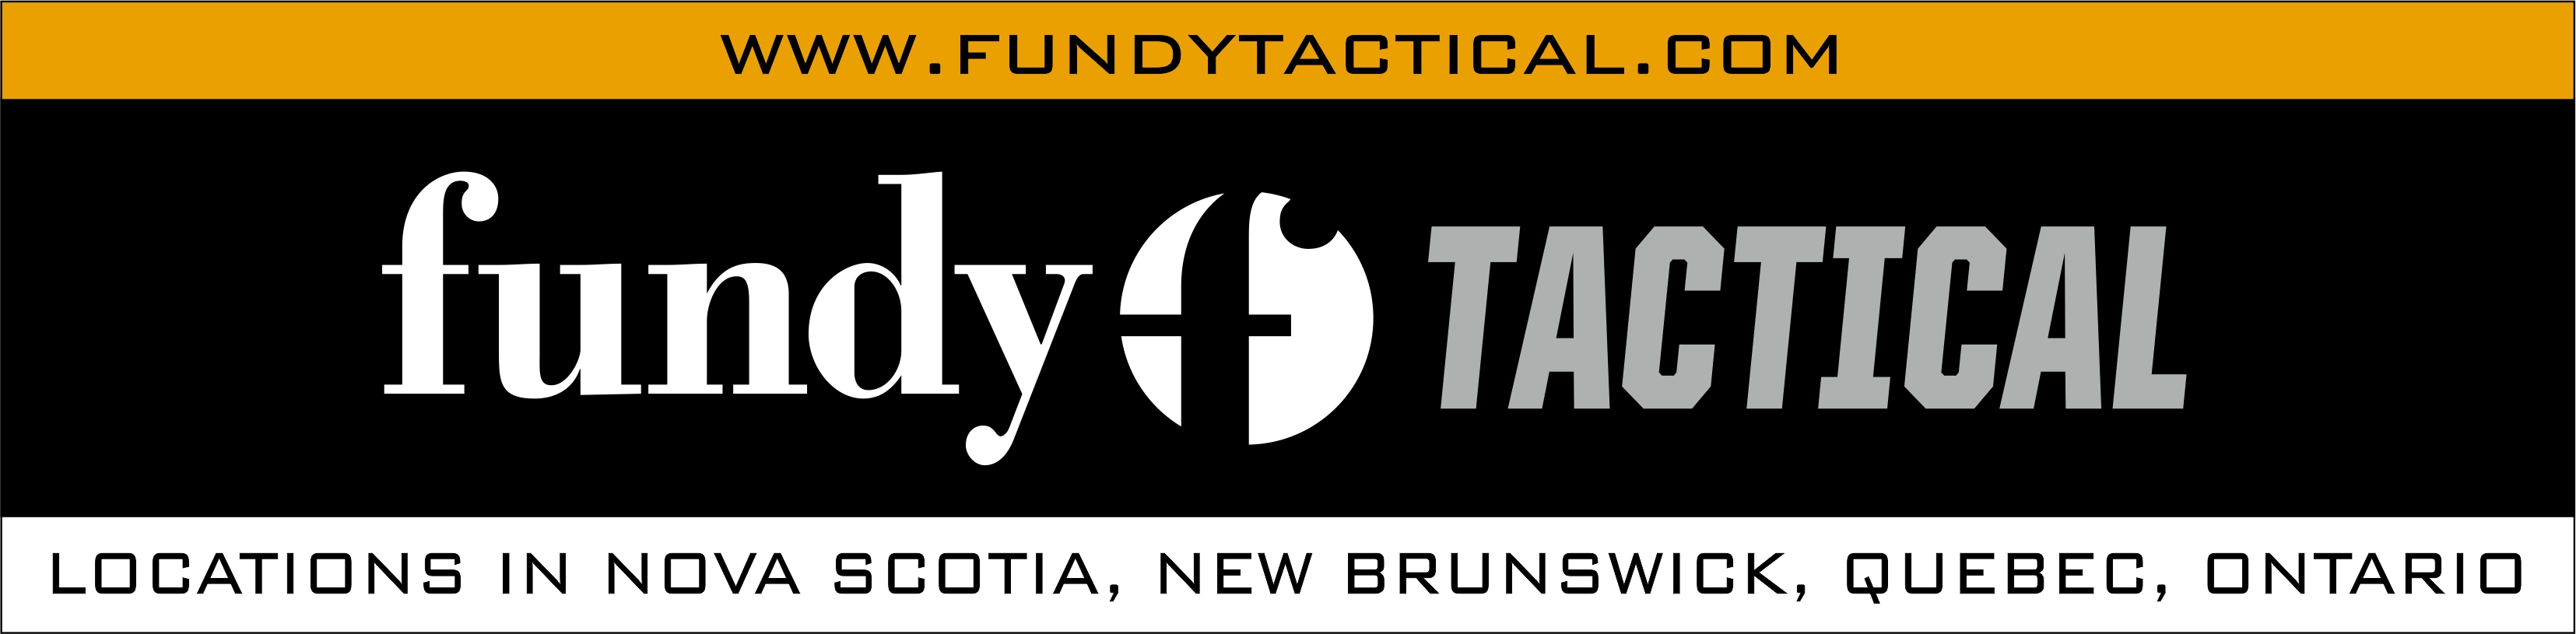 fundy-tactical-banner.jpg